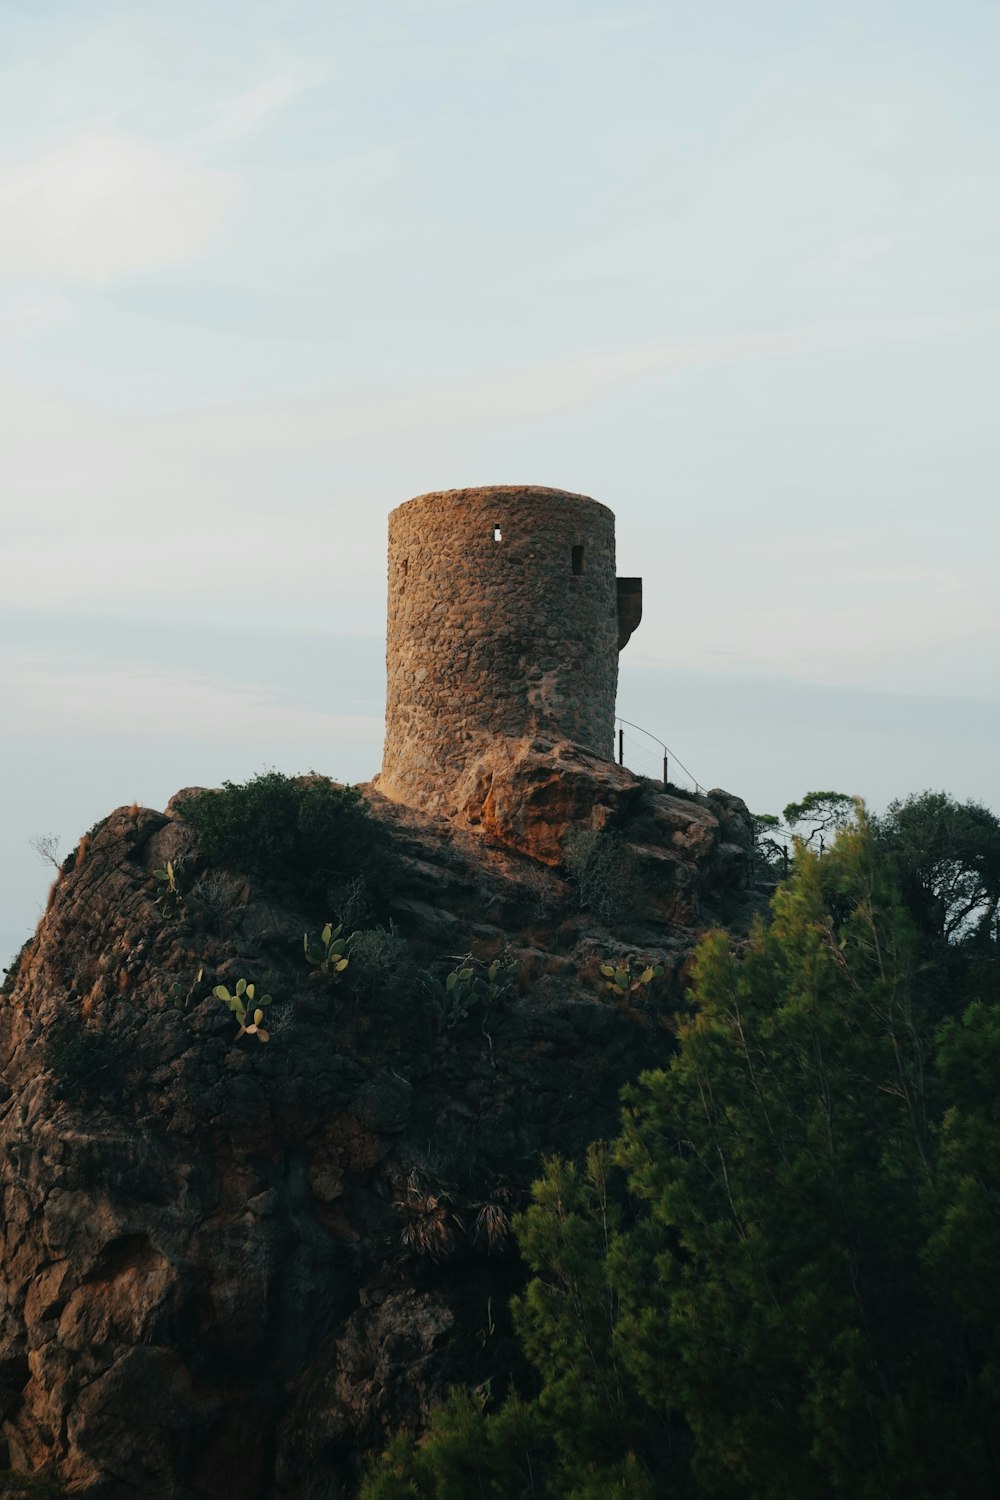 a stone tower on a cliff